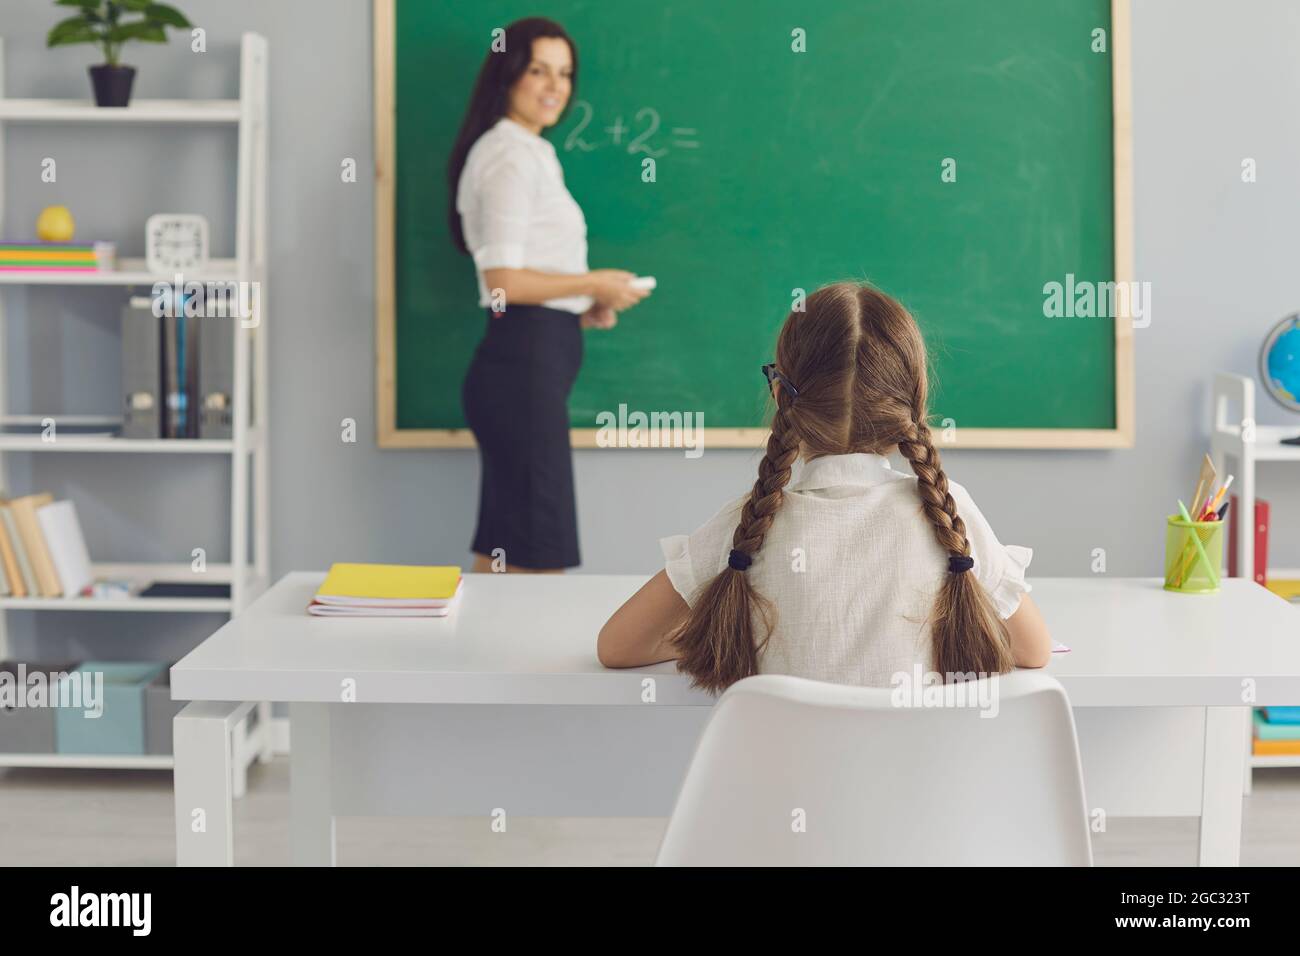 Schoolkid sitting at desk and listening attentively to teacher in modern classroom Stock Photo